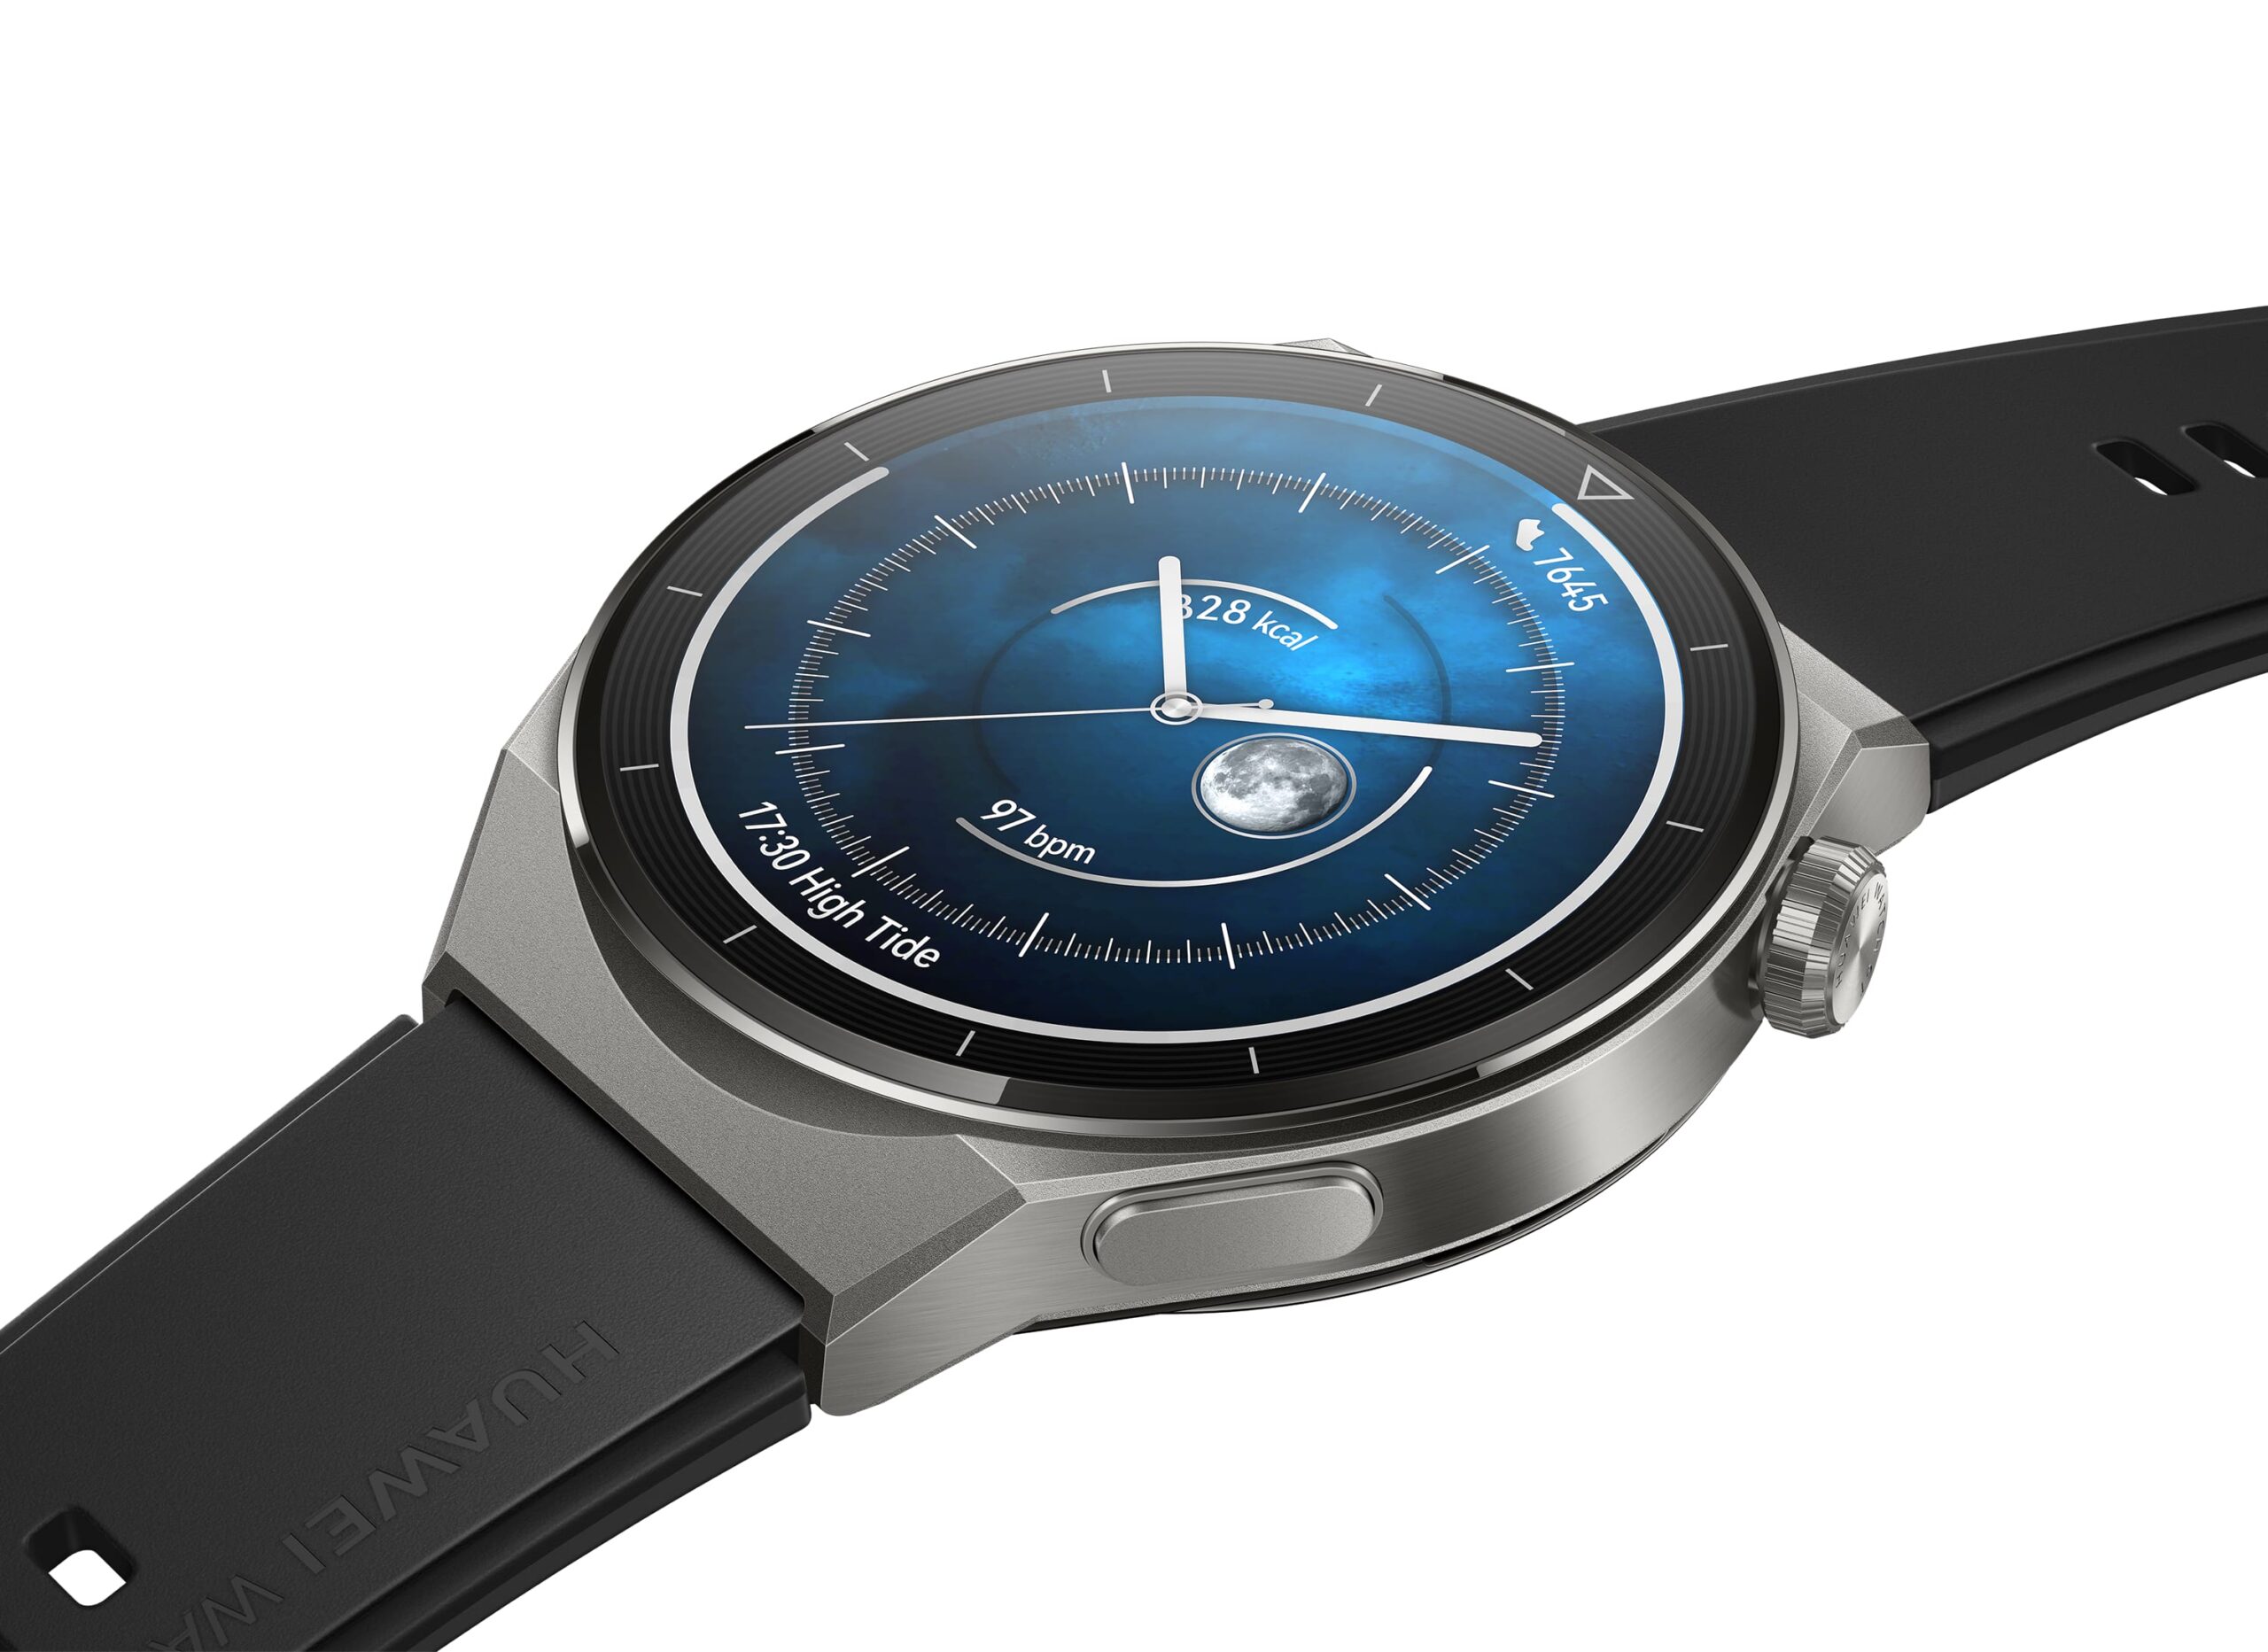 Huawei Watch GT 3 Pro review: The affordable luxury smartwatch